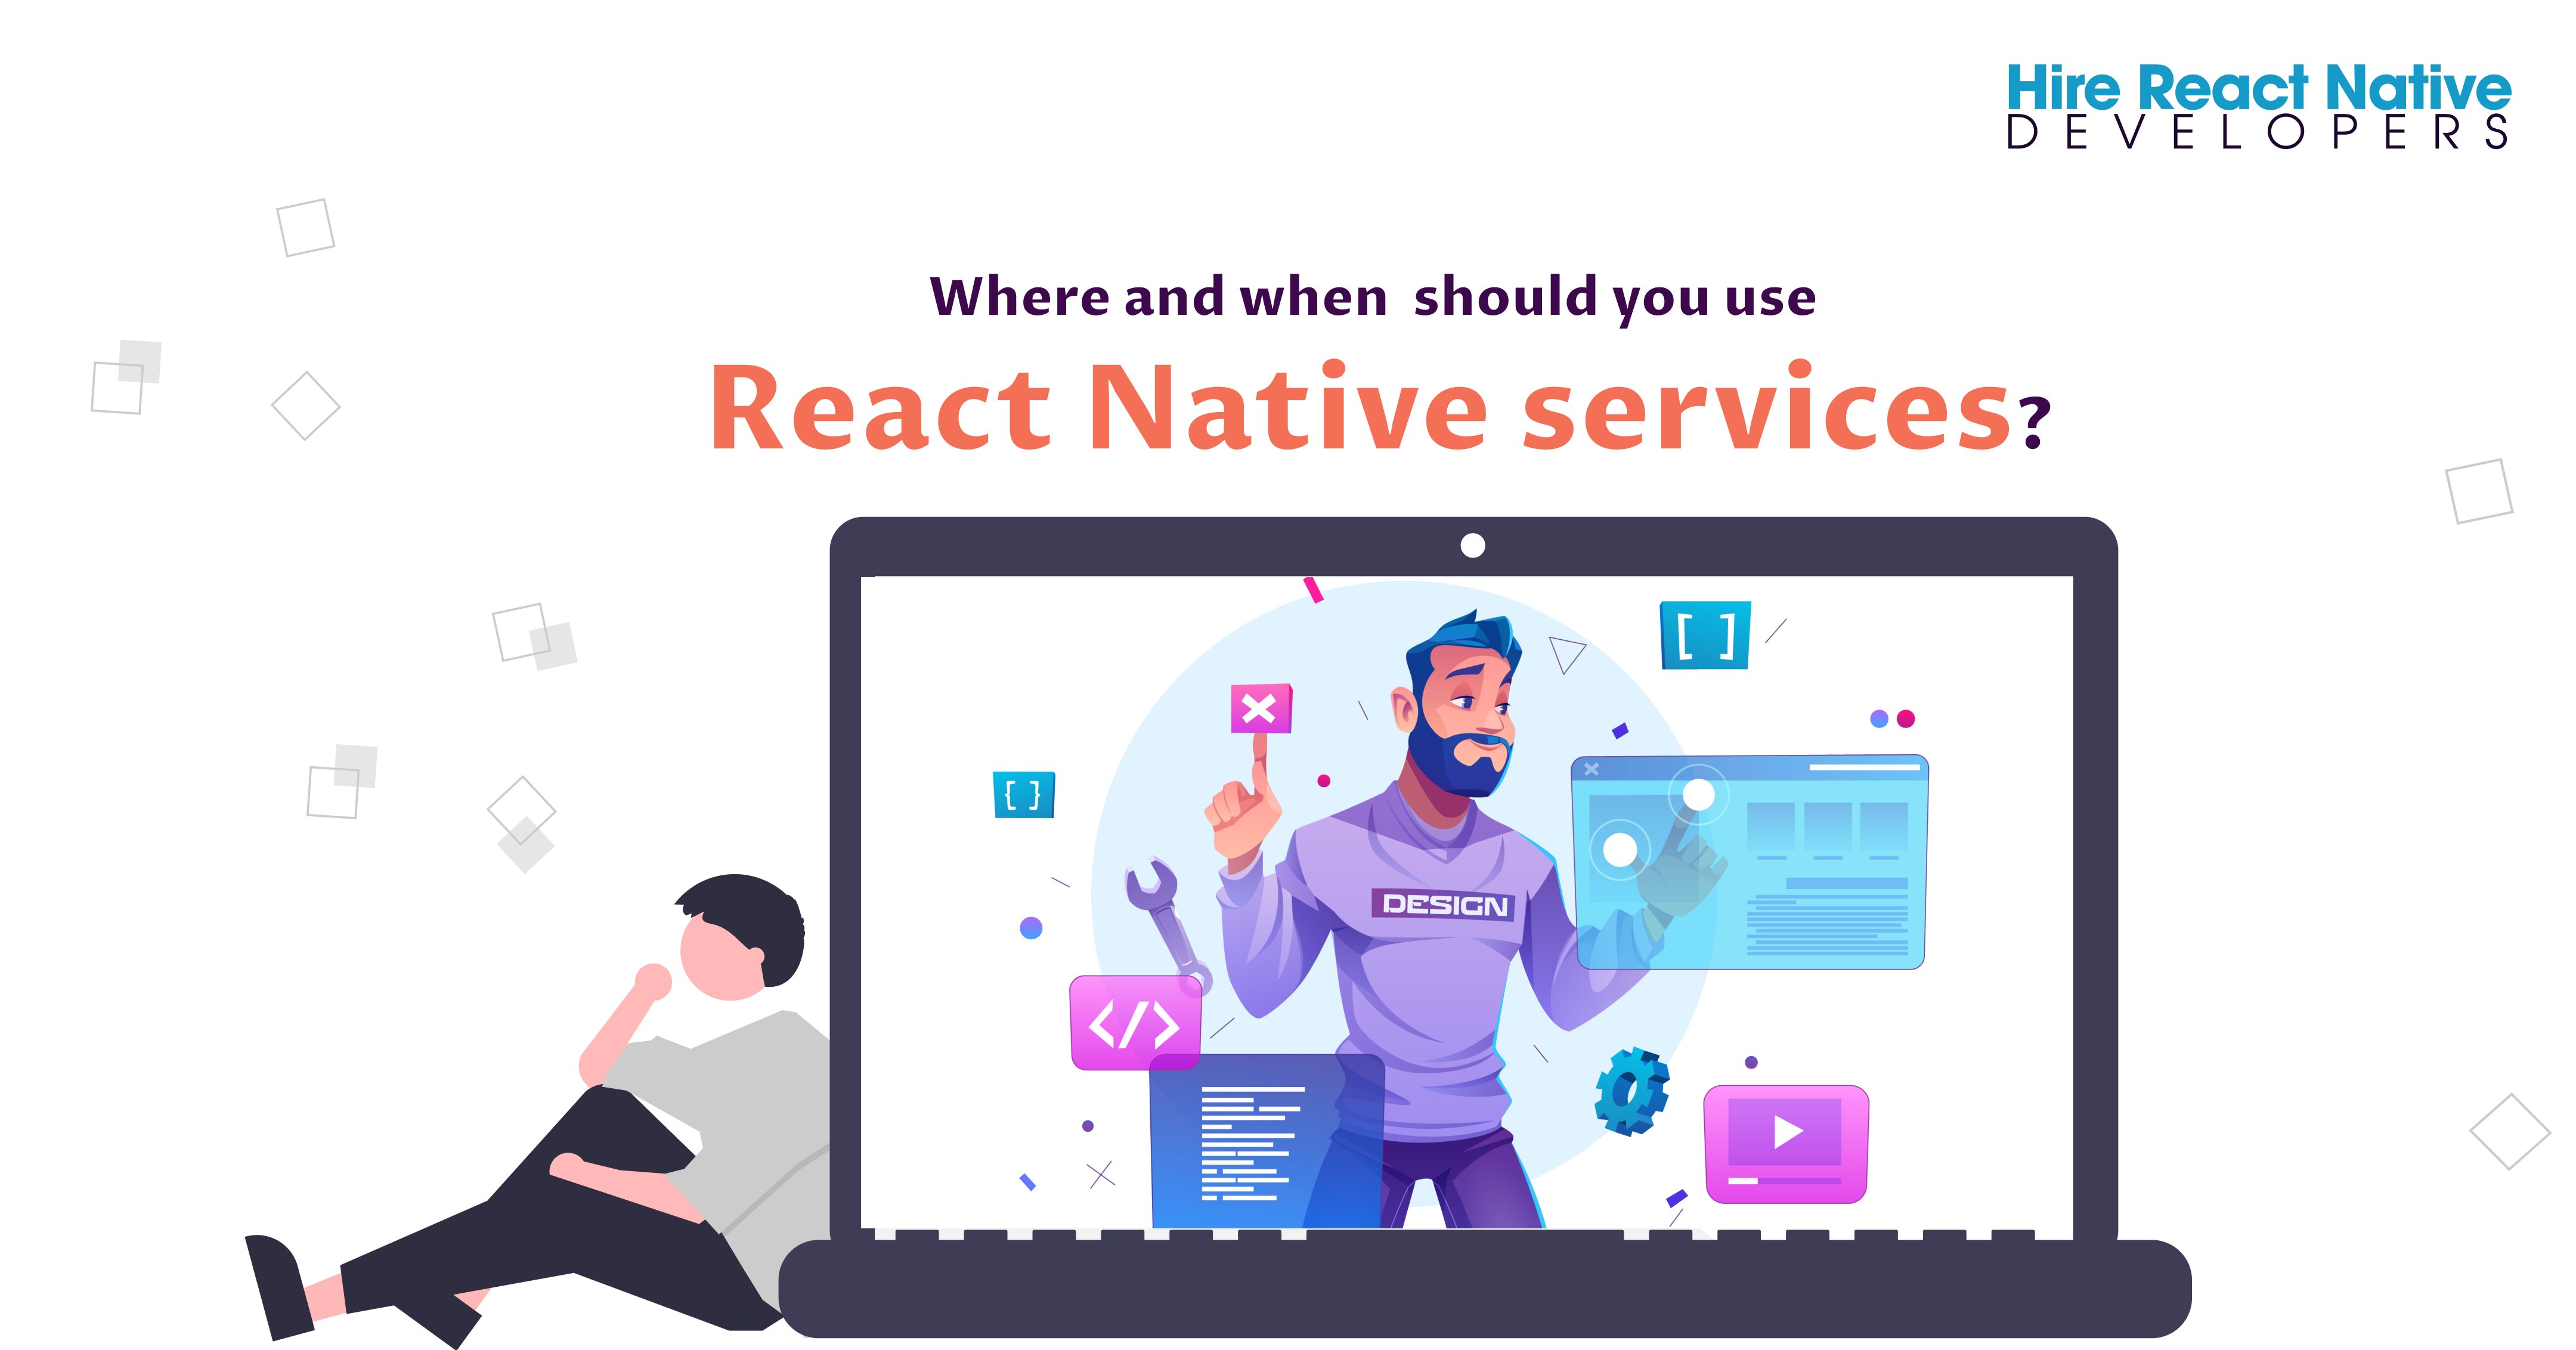 public/uploads/2021/04/Where-and-when-should-you-use-reactnative-services.png